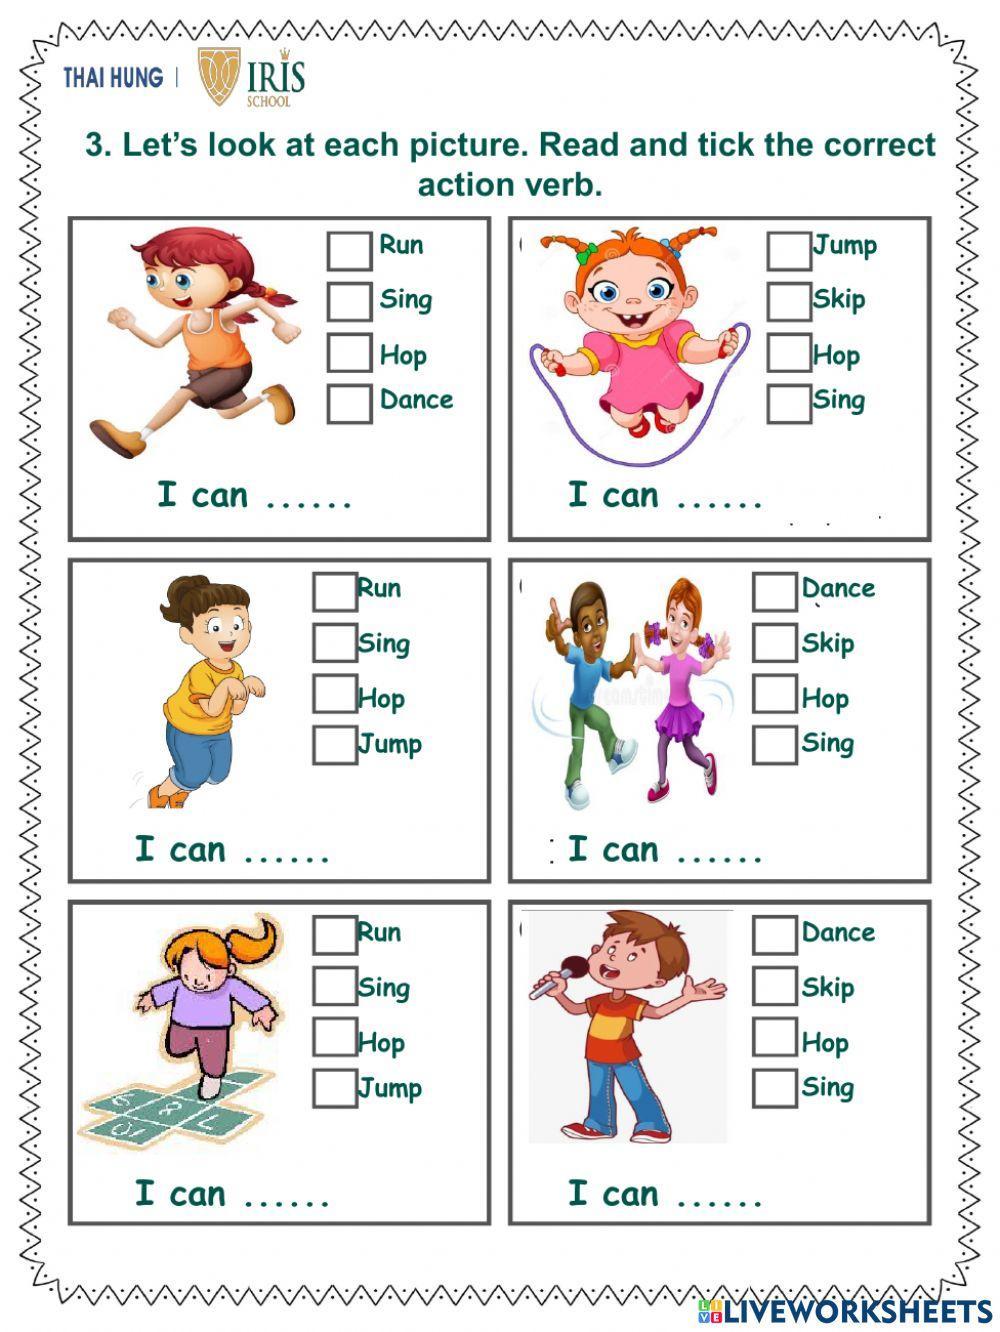 English-Worksheet about Action Verbs